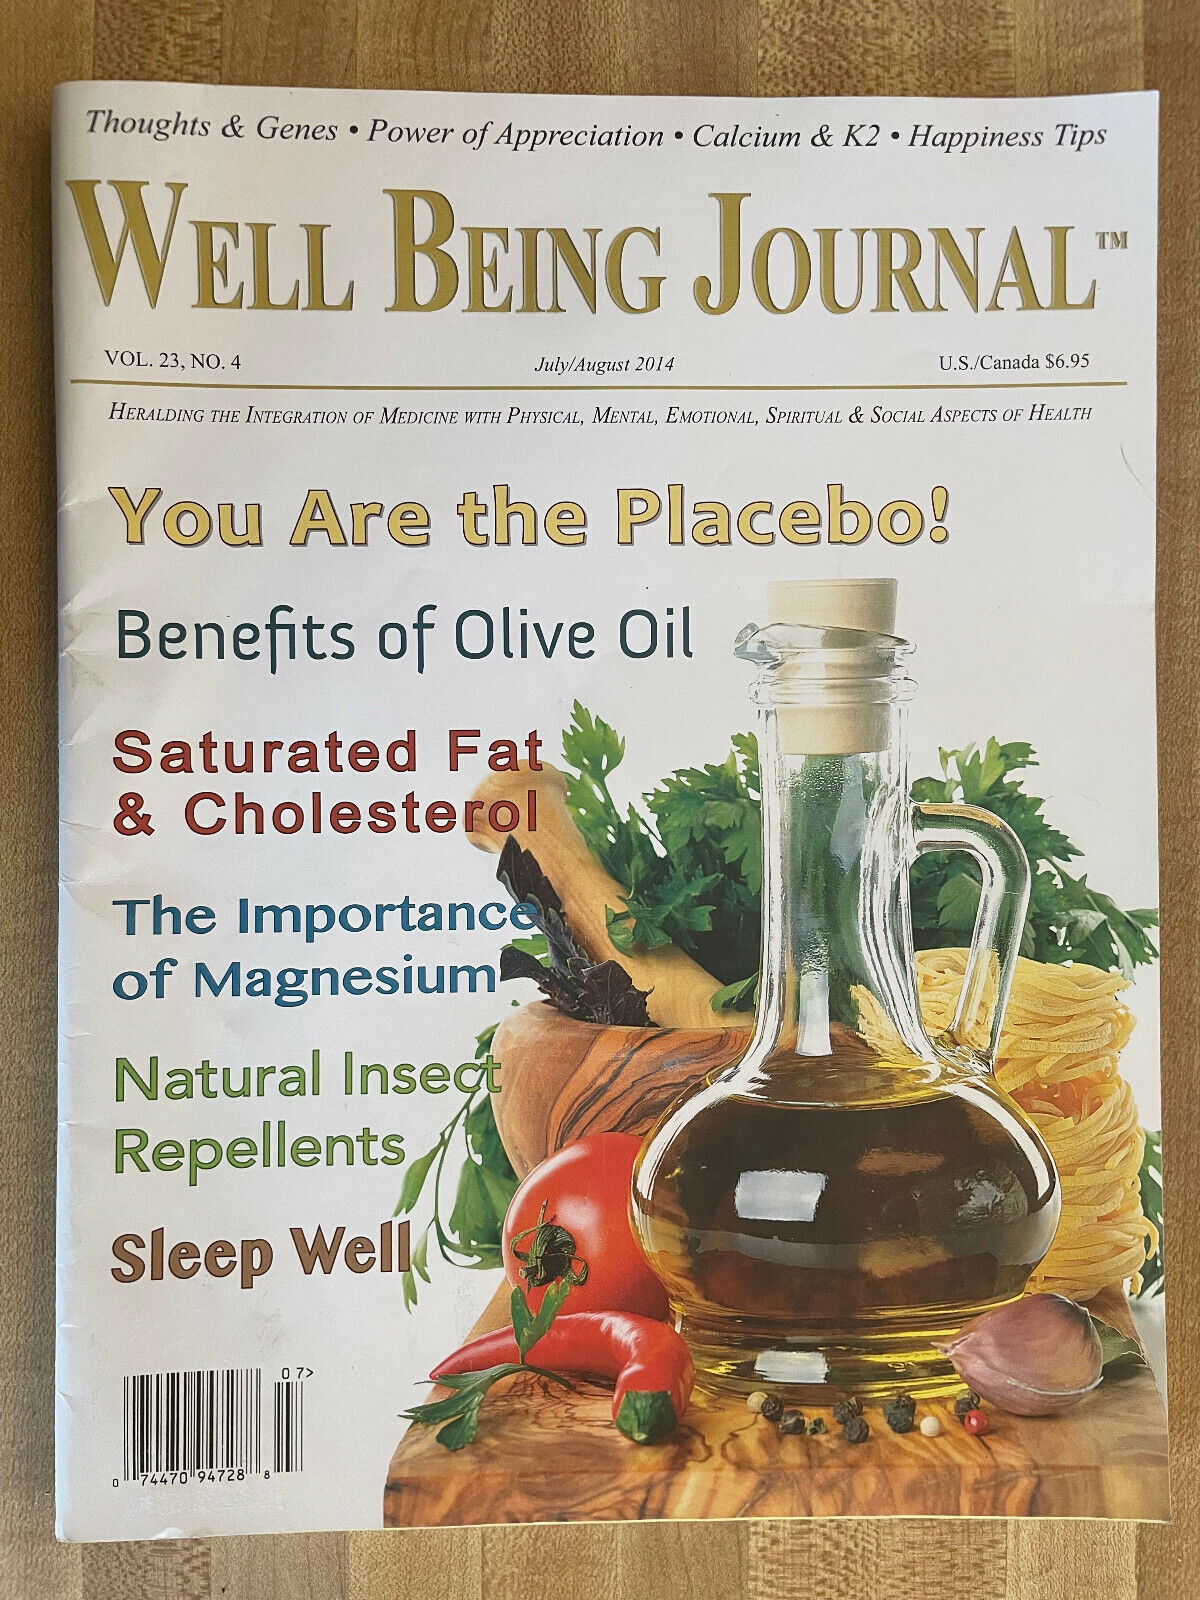 WELL BEING JOURNAL Magazine July August 2014 Calcium Saturated Fat Cholesterol